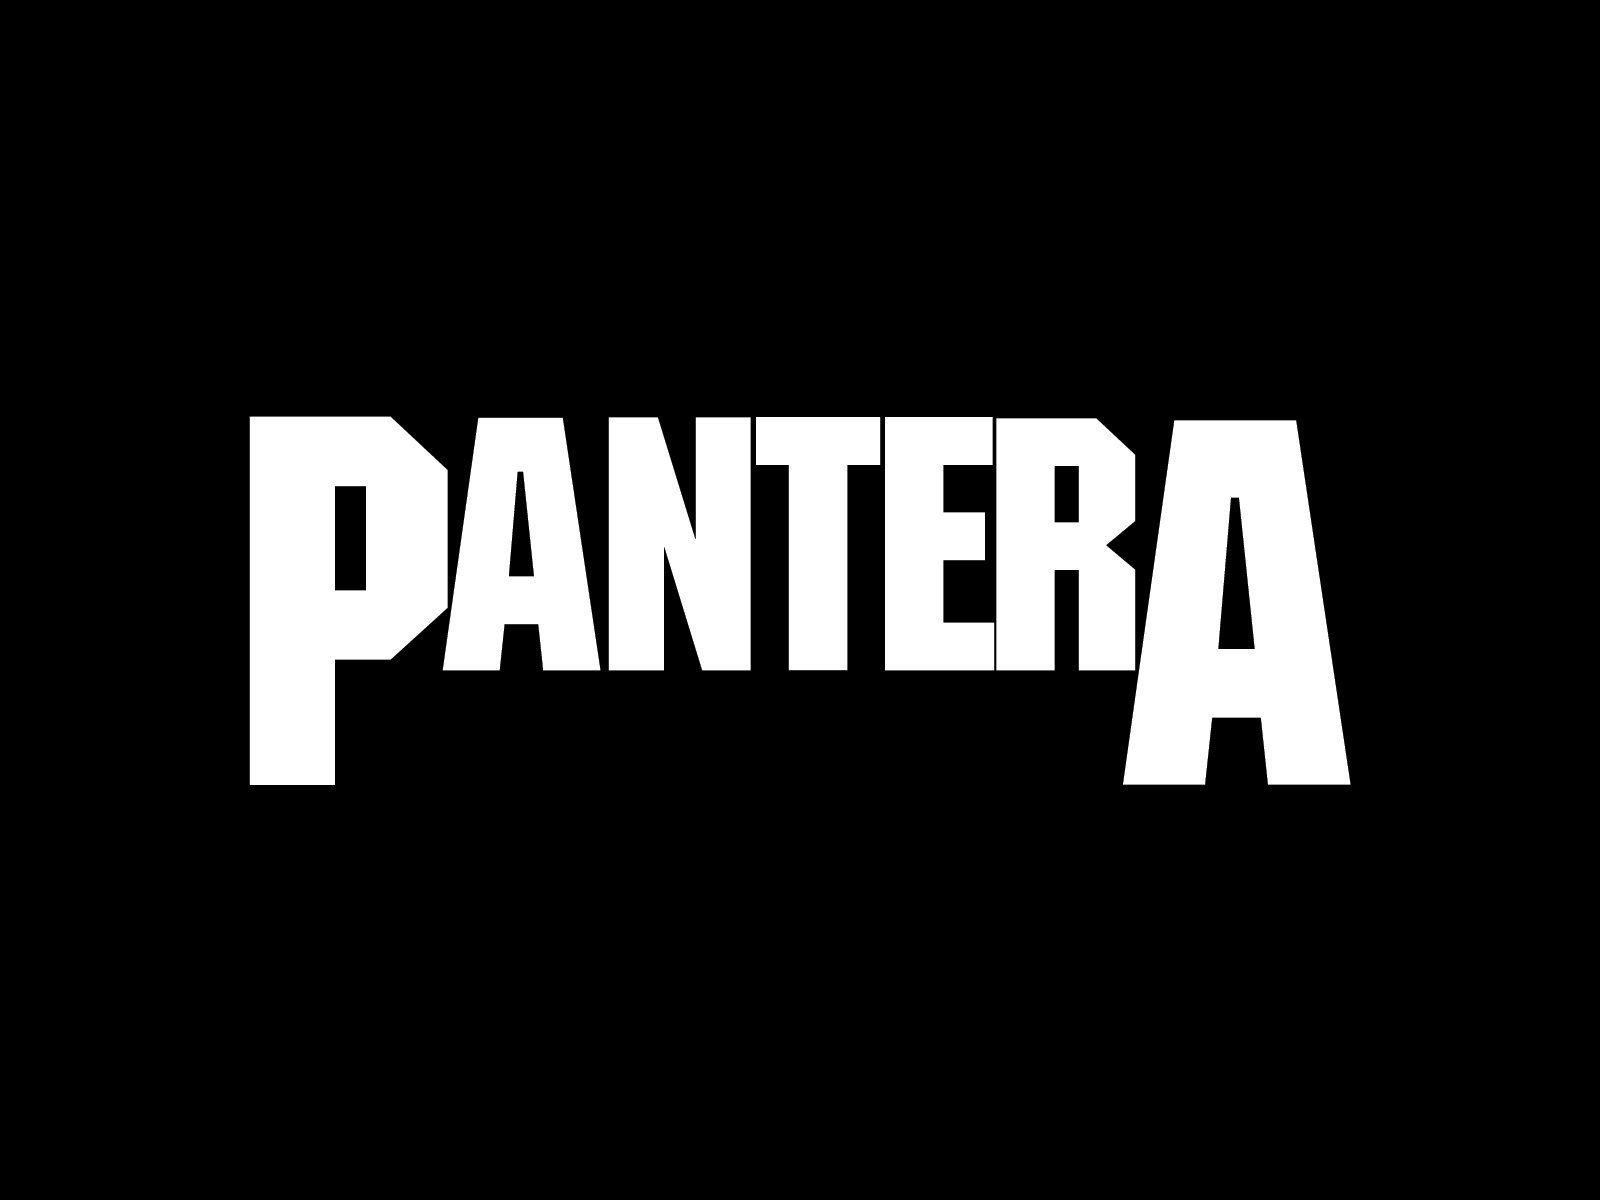 CONCERT REVIEW: Pantera - Elegant Weapons Live at Verti Music Hall, Berlin  - Ghost Cult MagazineGhost Cult Magazine